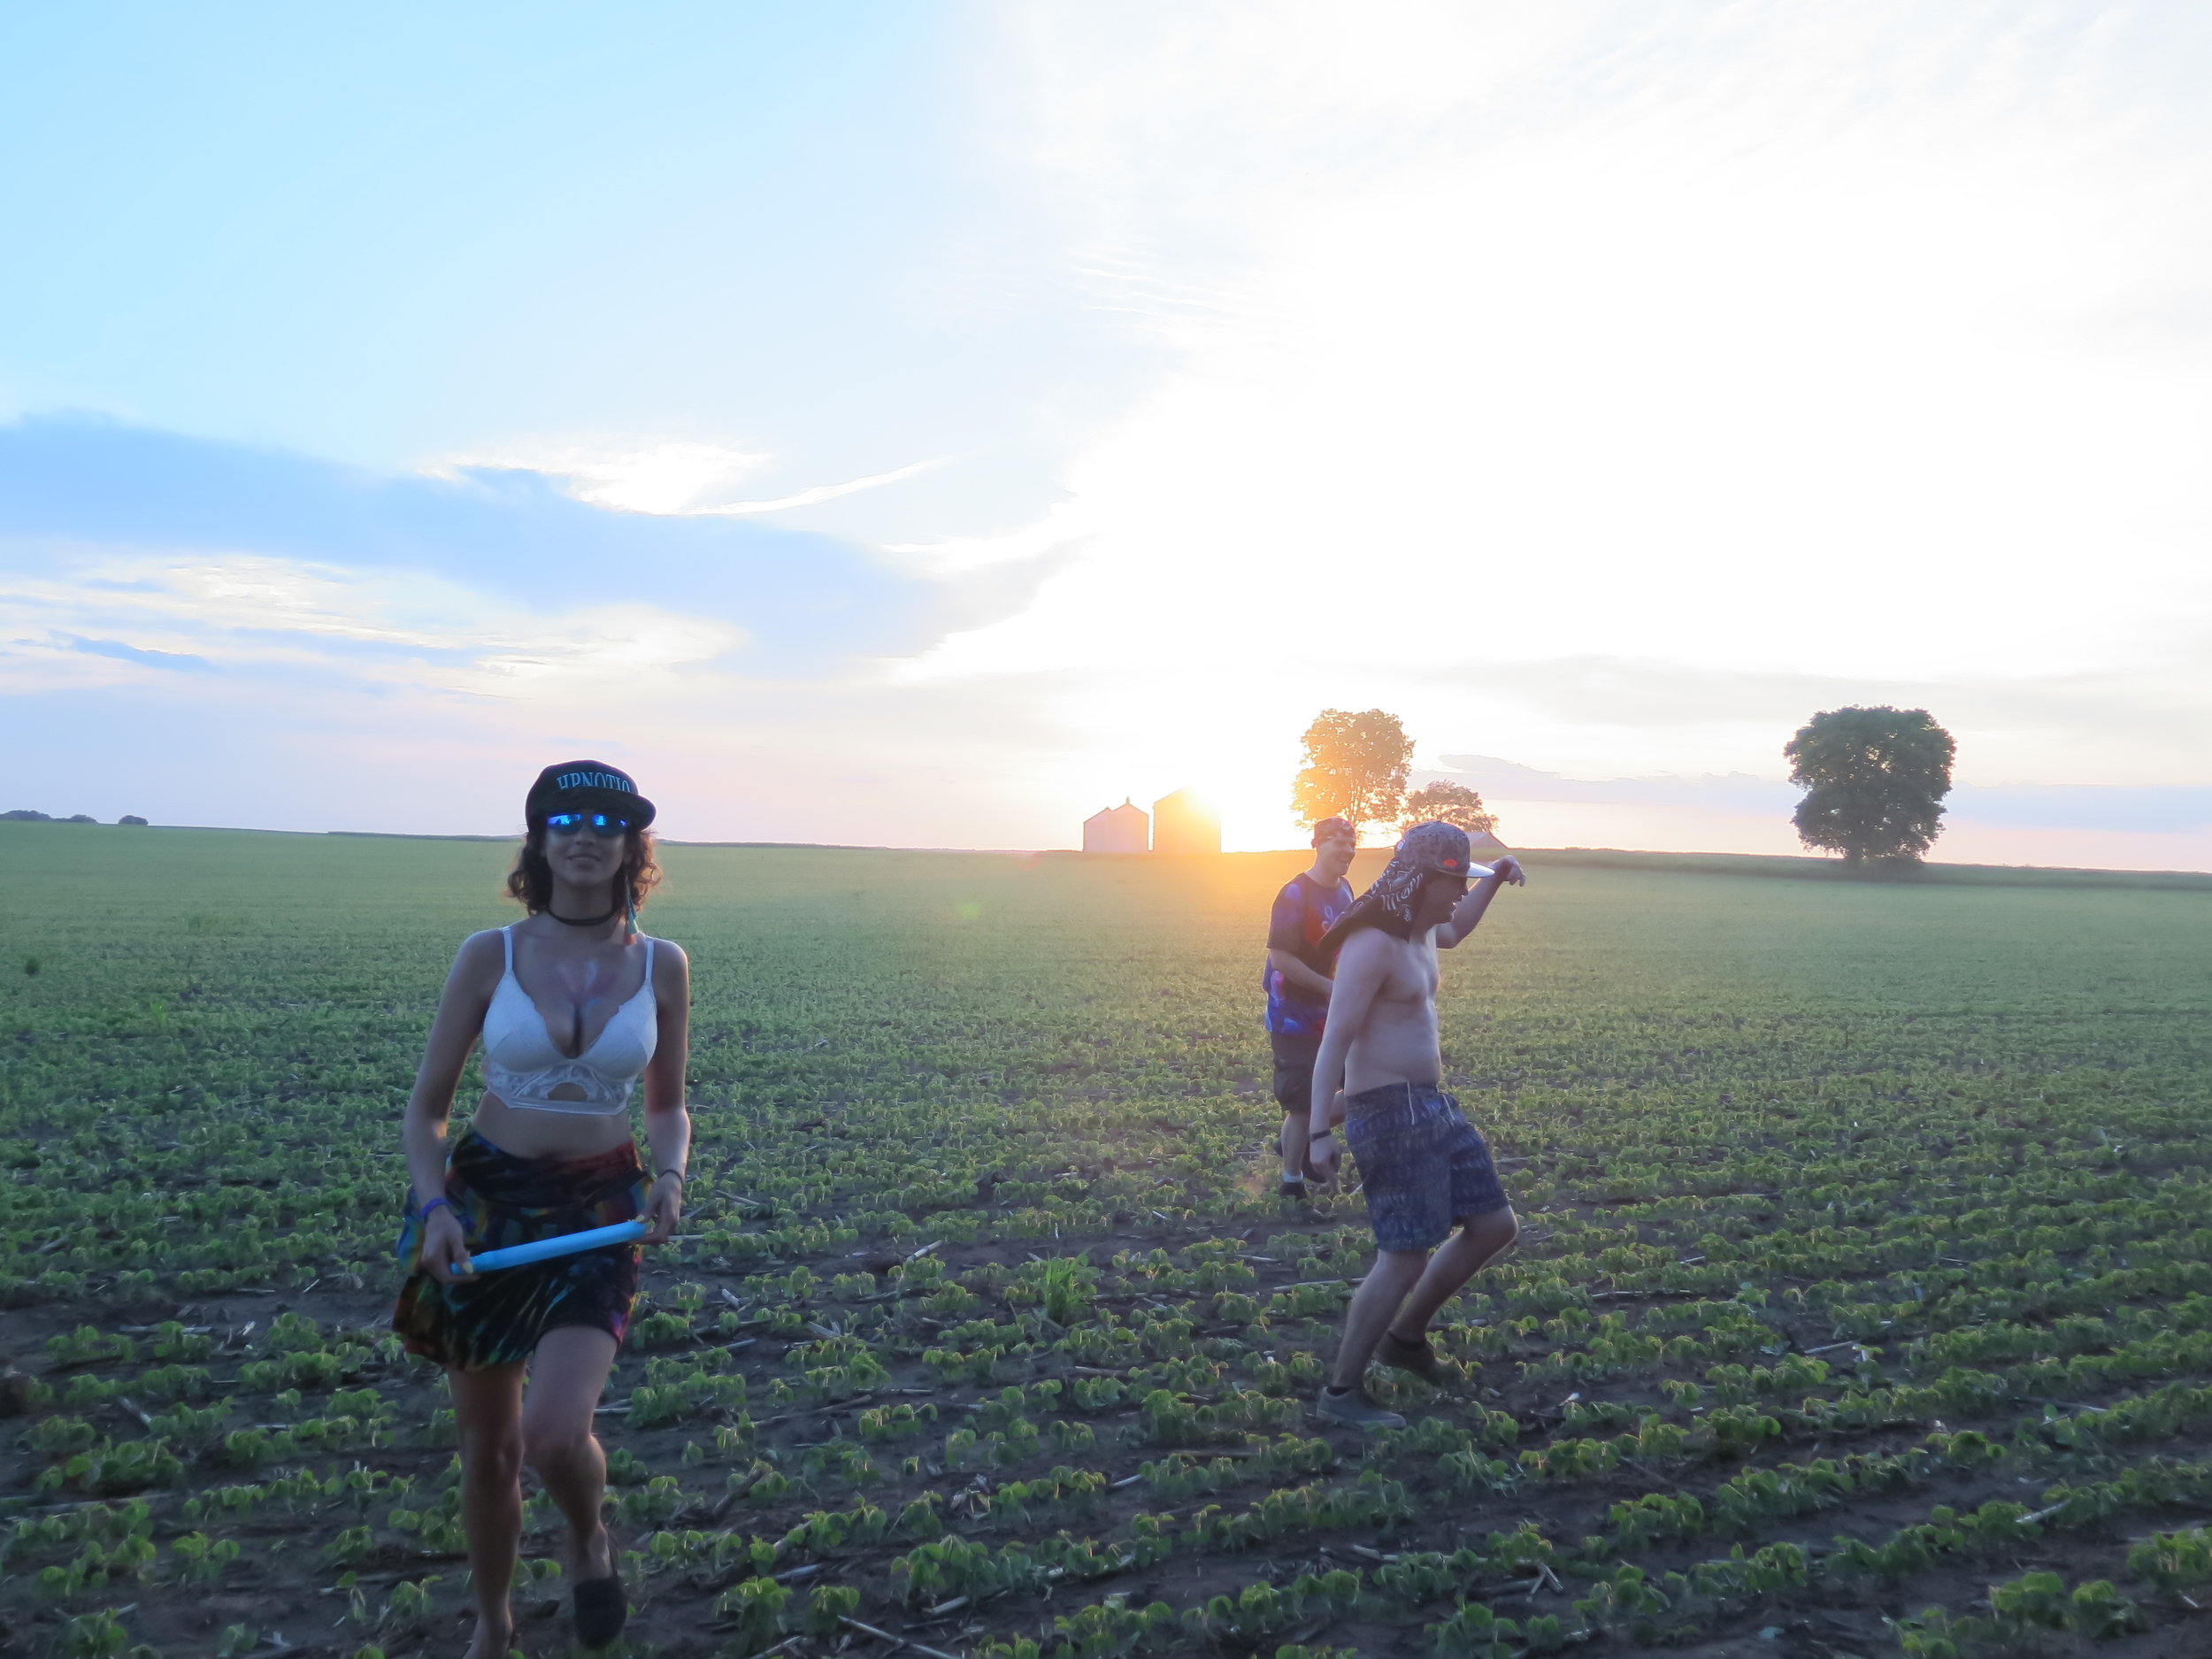 Dancing in the crops to Phil Less